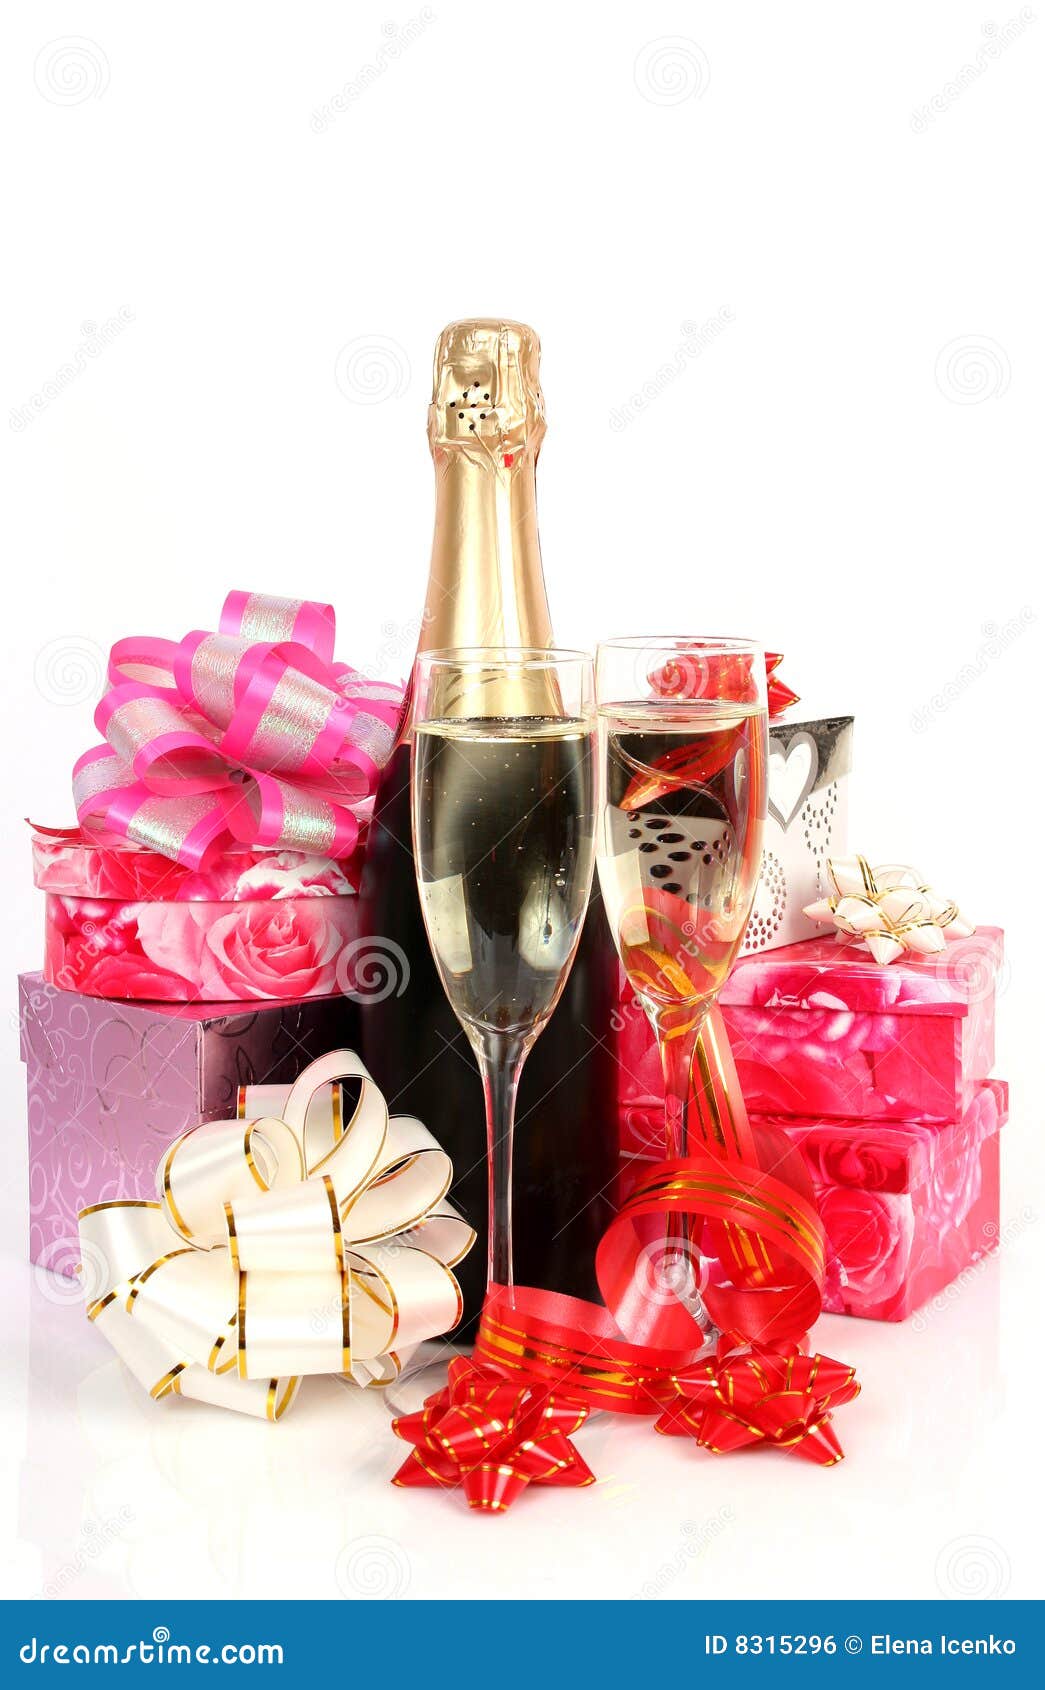 Bottle with a champagne stock photo. Image of wine, gift - 8315296